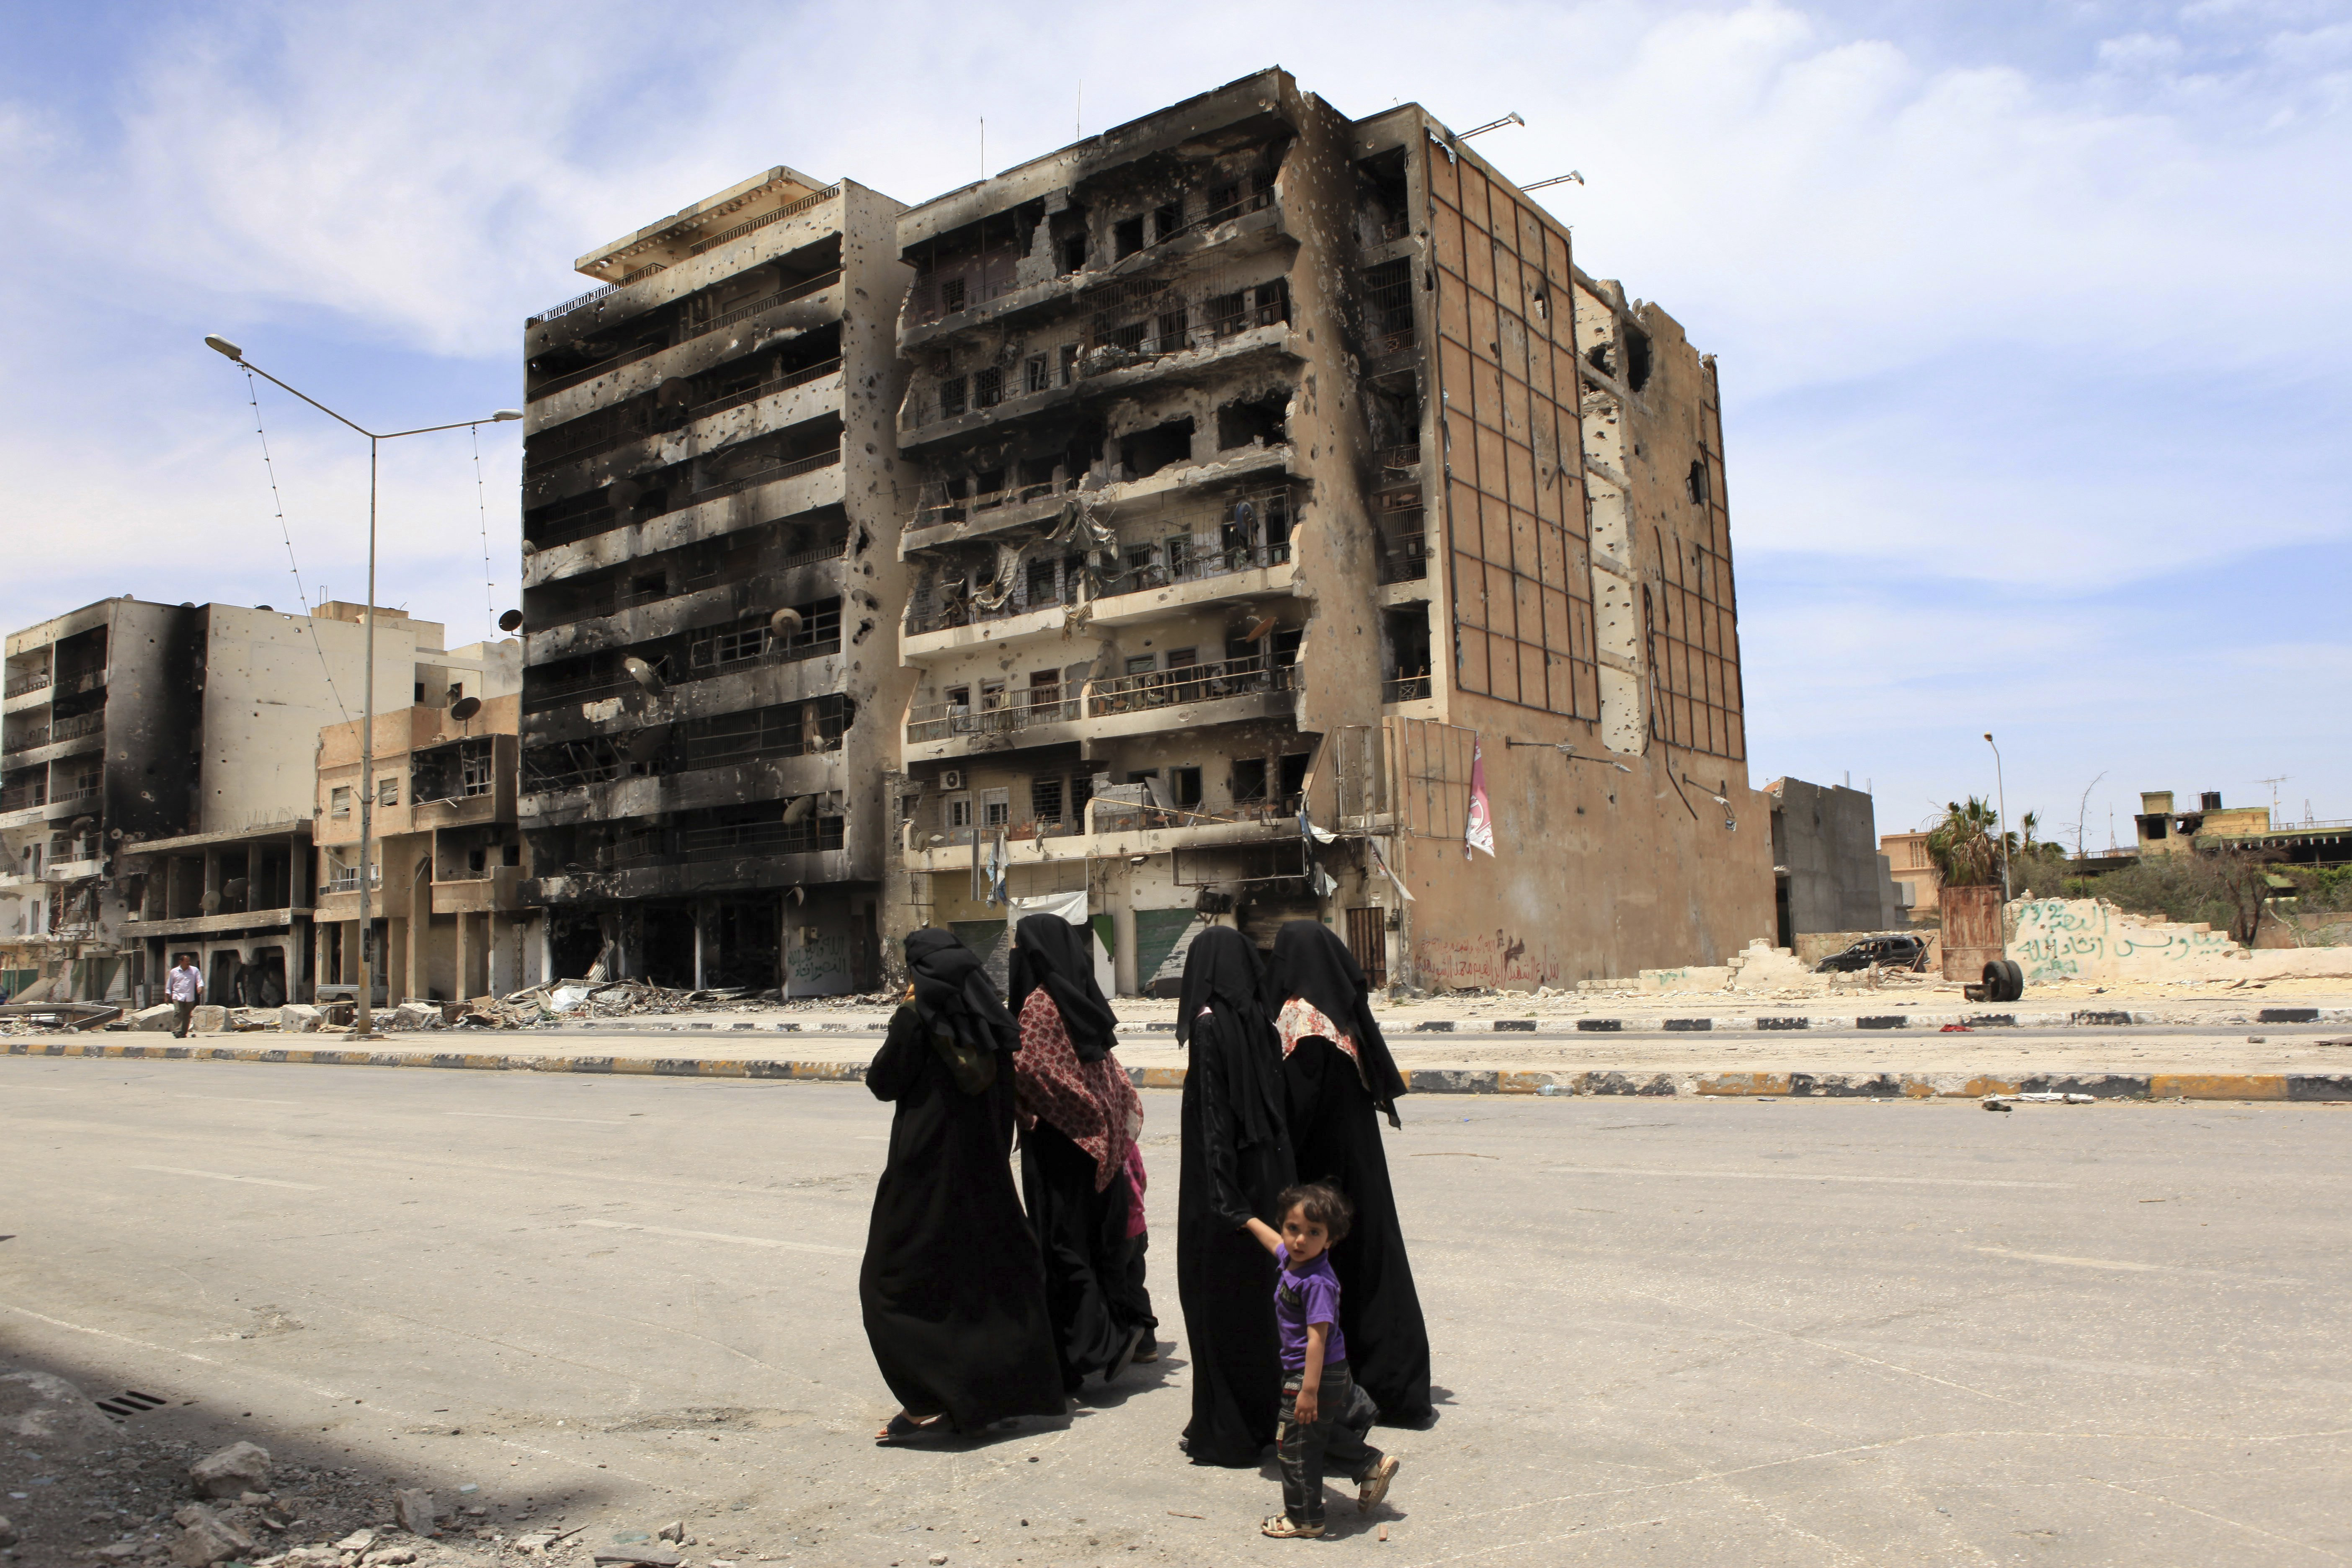 Women walking in front of bombed out buildings in Misrata